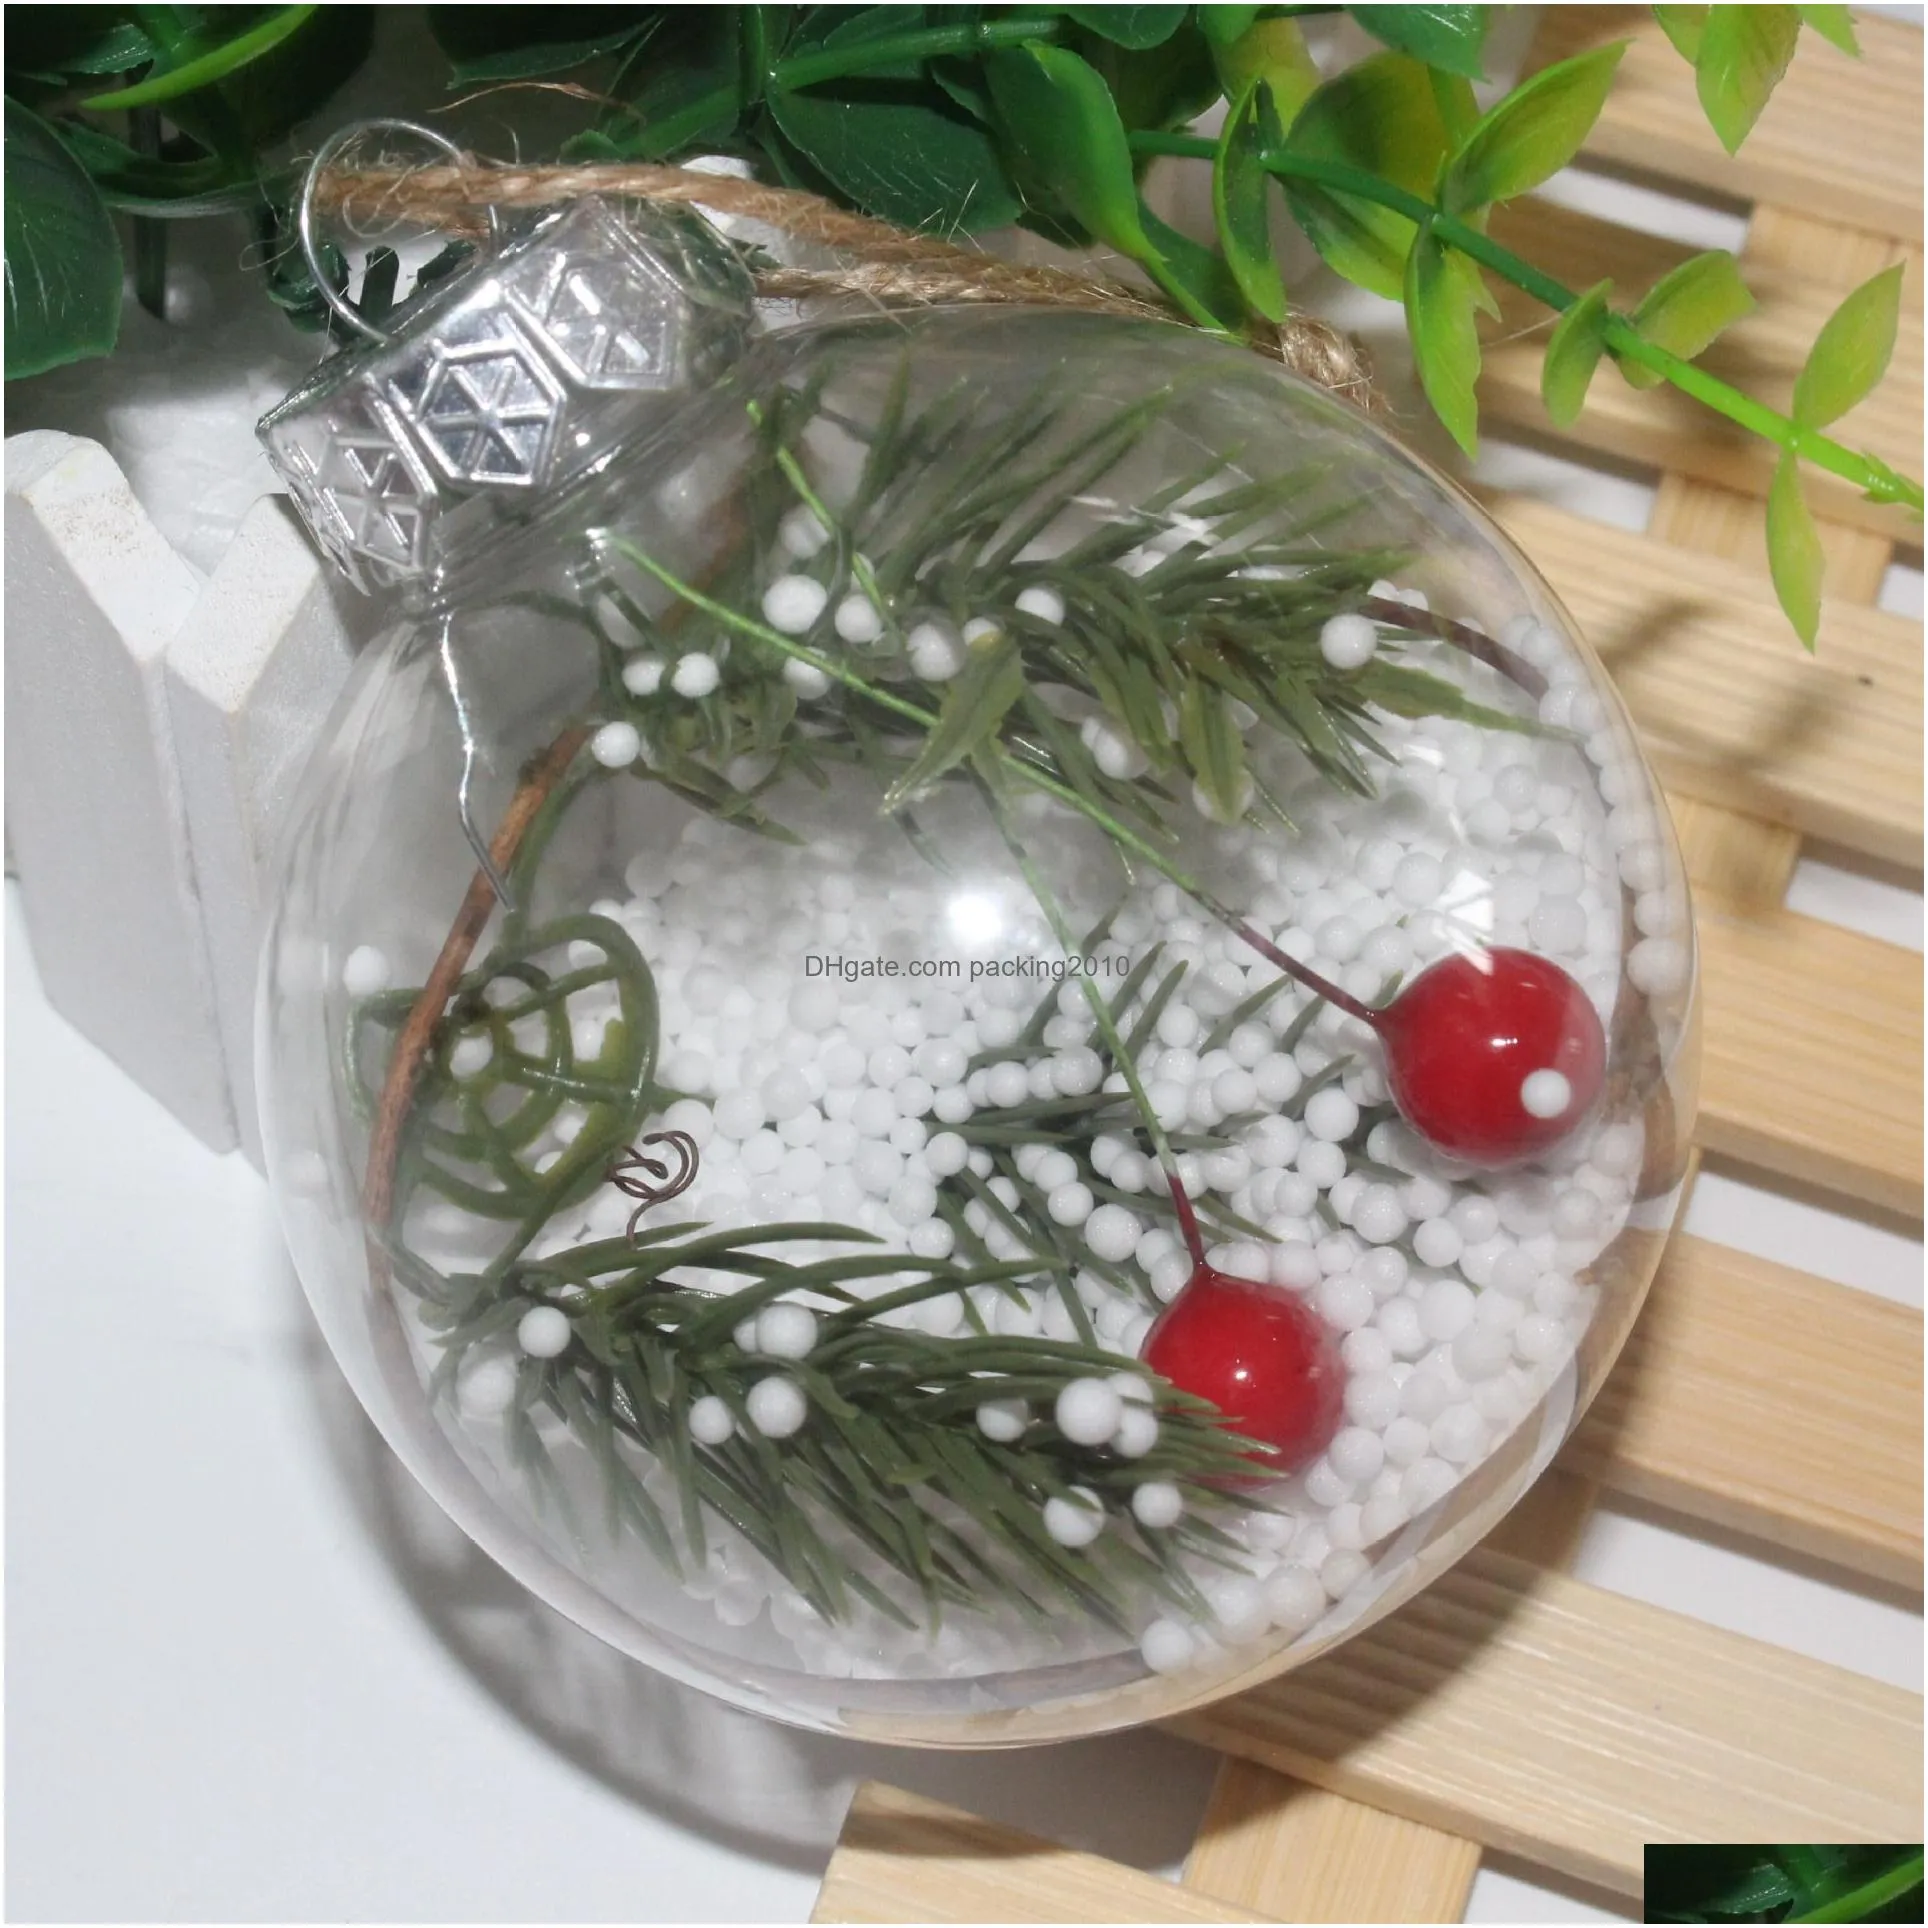 new santa clear bauble ornament gift transparent ball for christmas decorations romantic plastic ball for christmas tree home decor